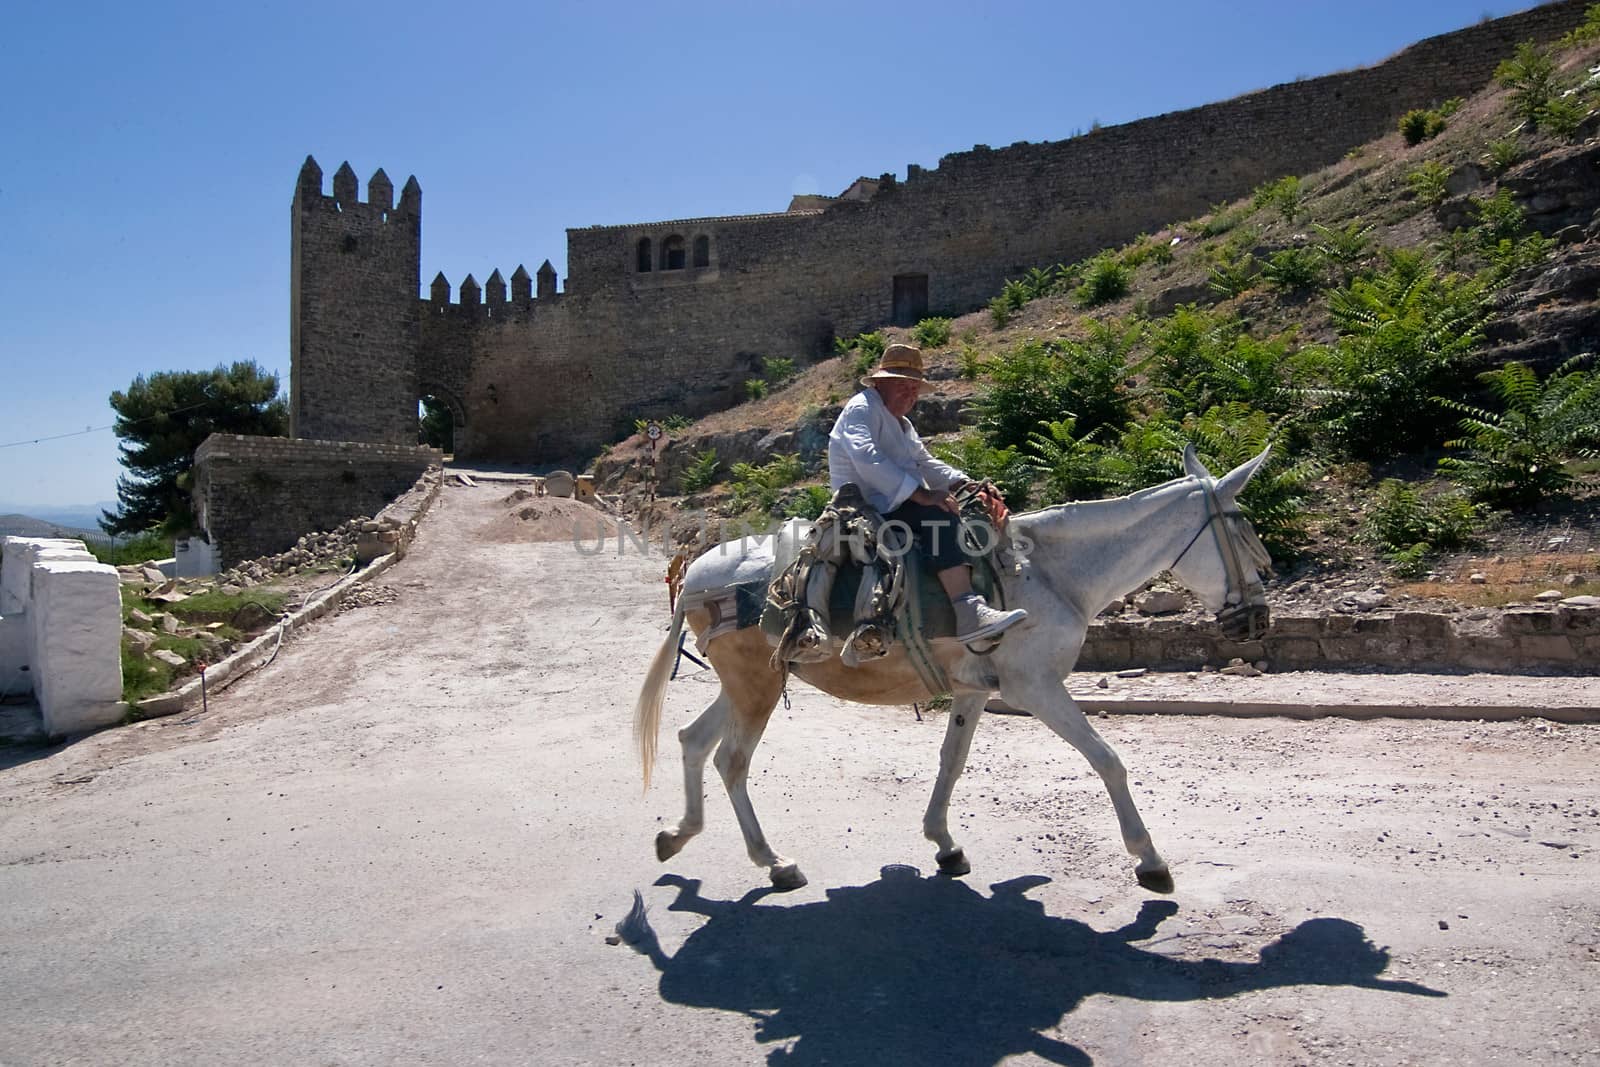  Elder walking in donkey close to the Tower of the Barbacana, Sabiote, Jaen, Spain